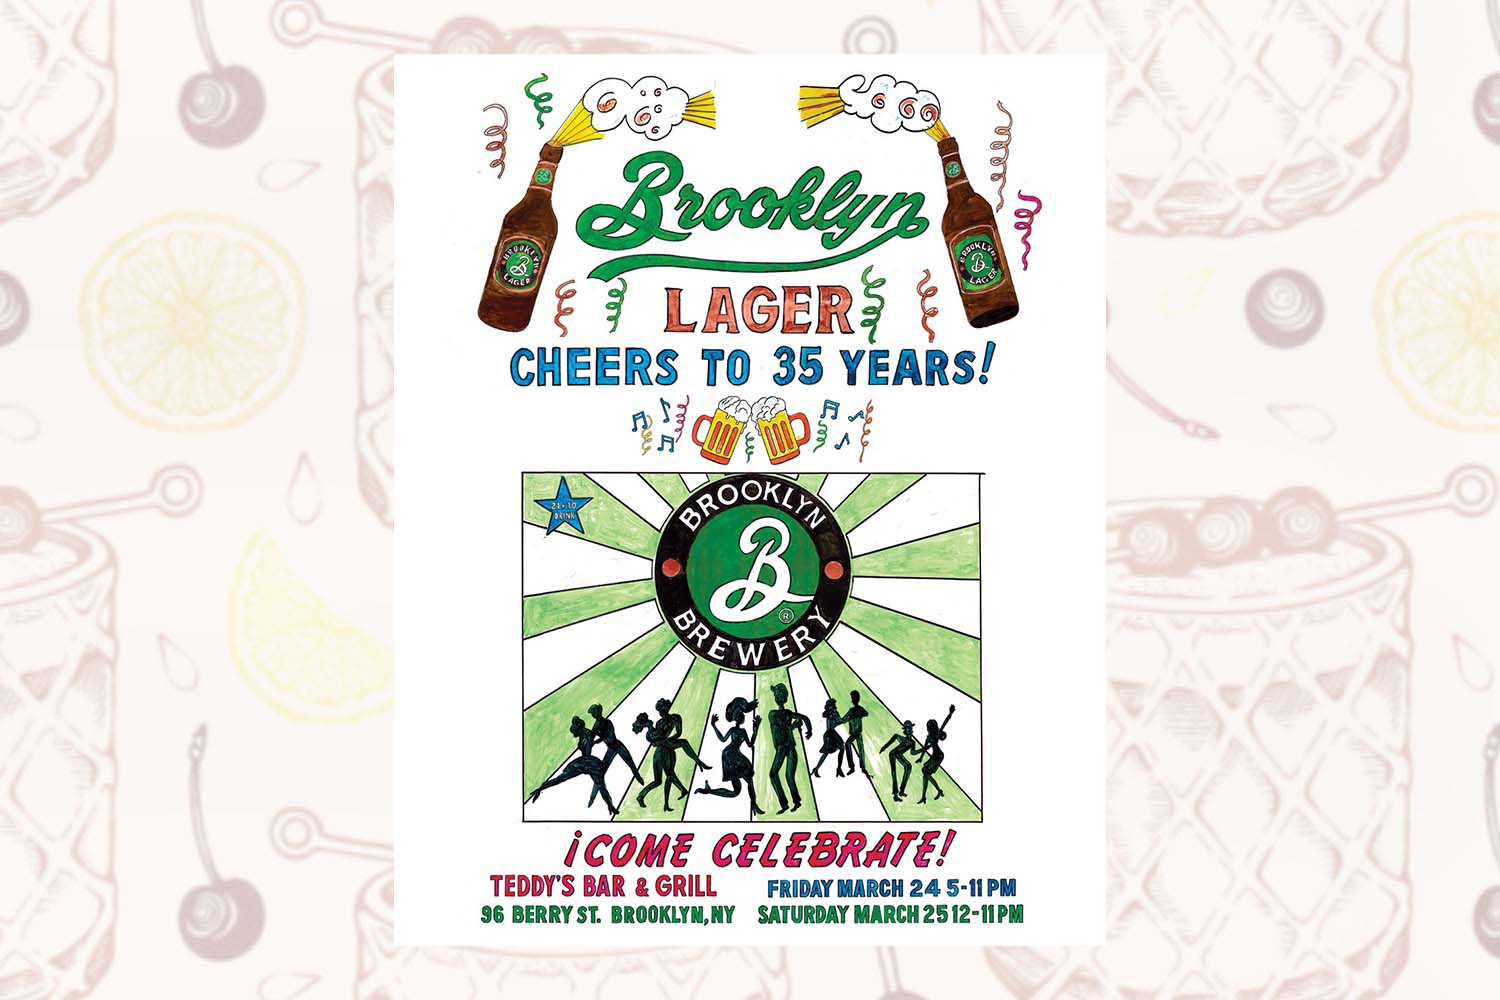 The Brooklyn Lager party invite for Teddy's (March 24-25)